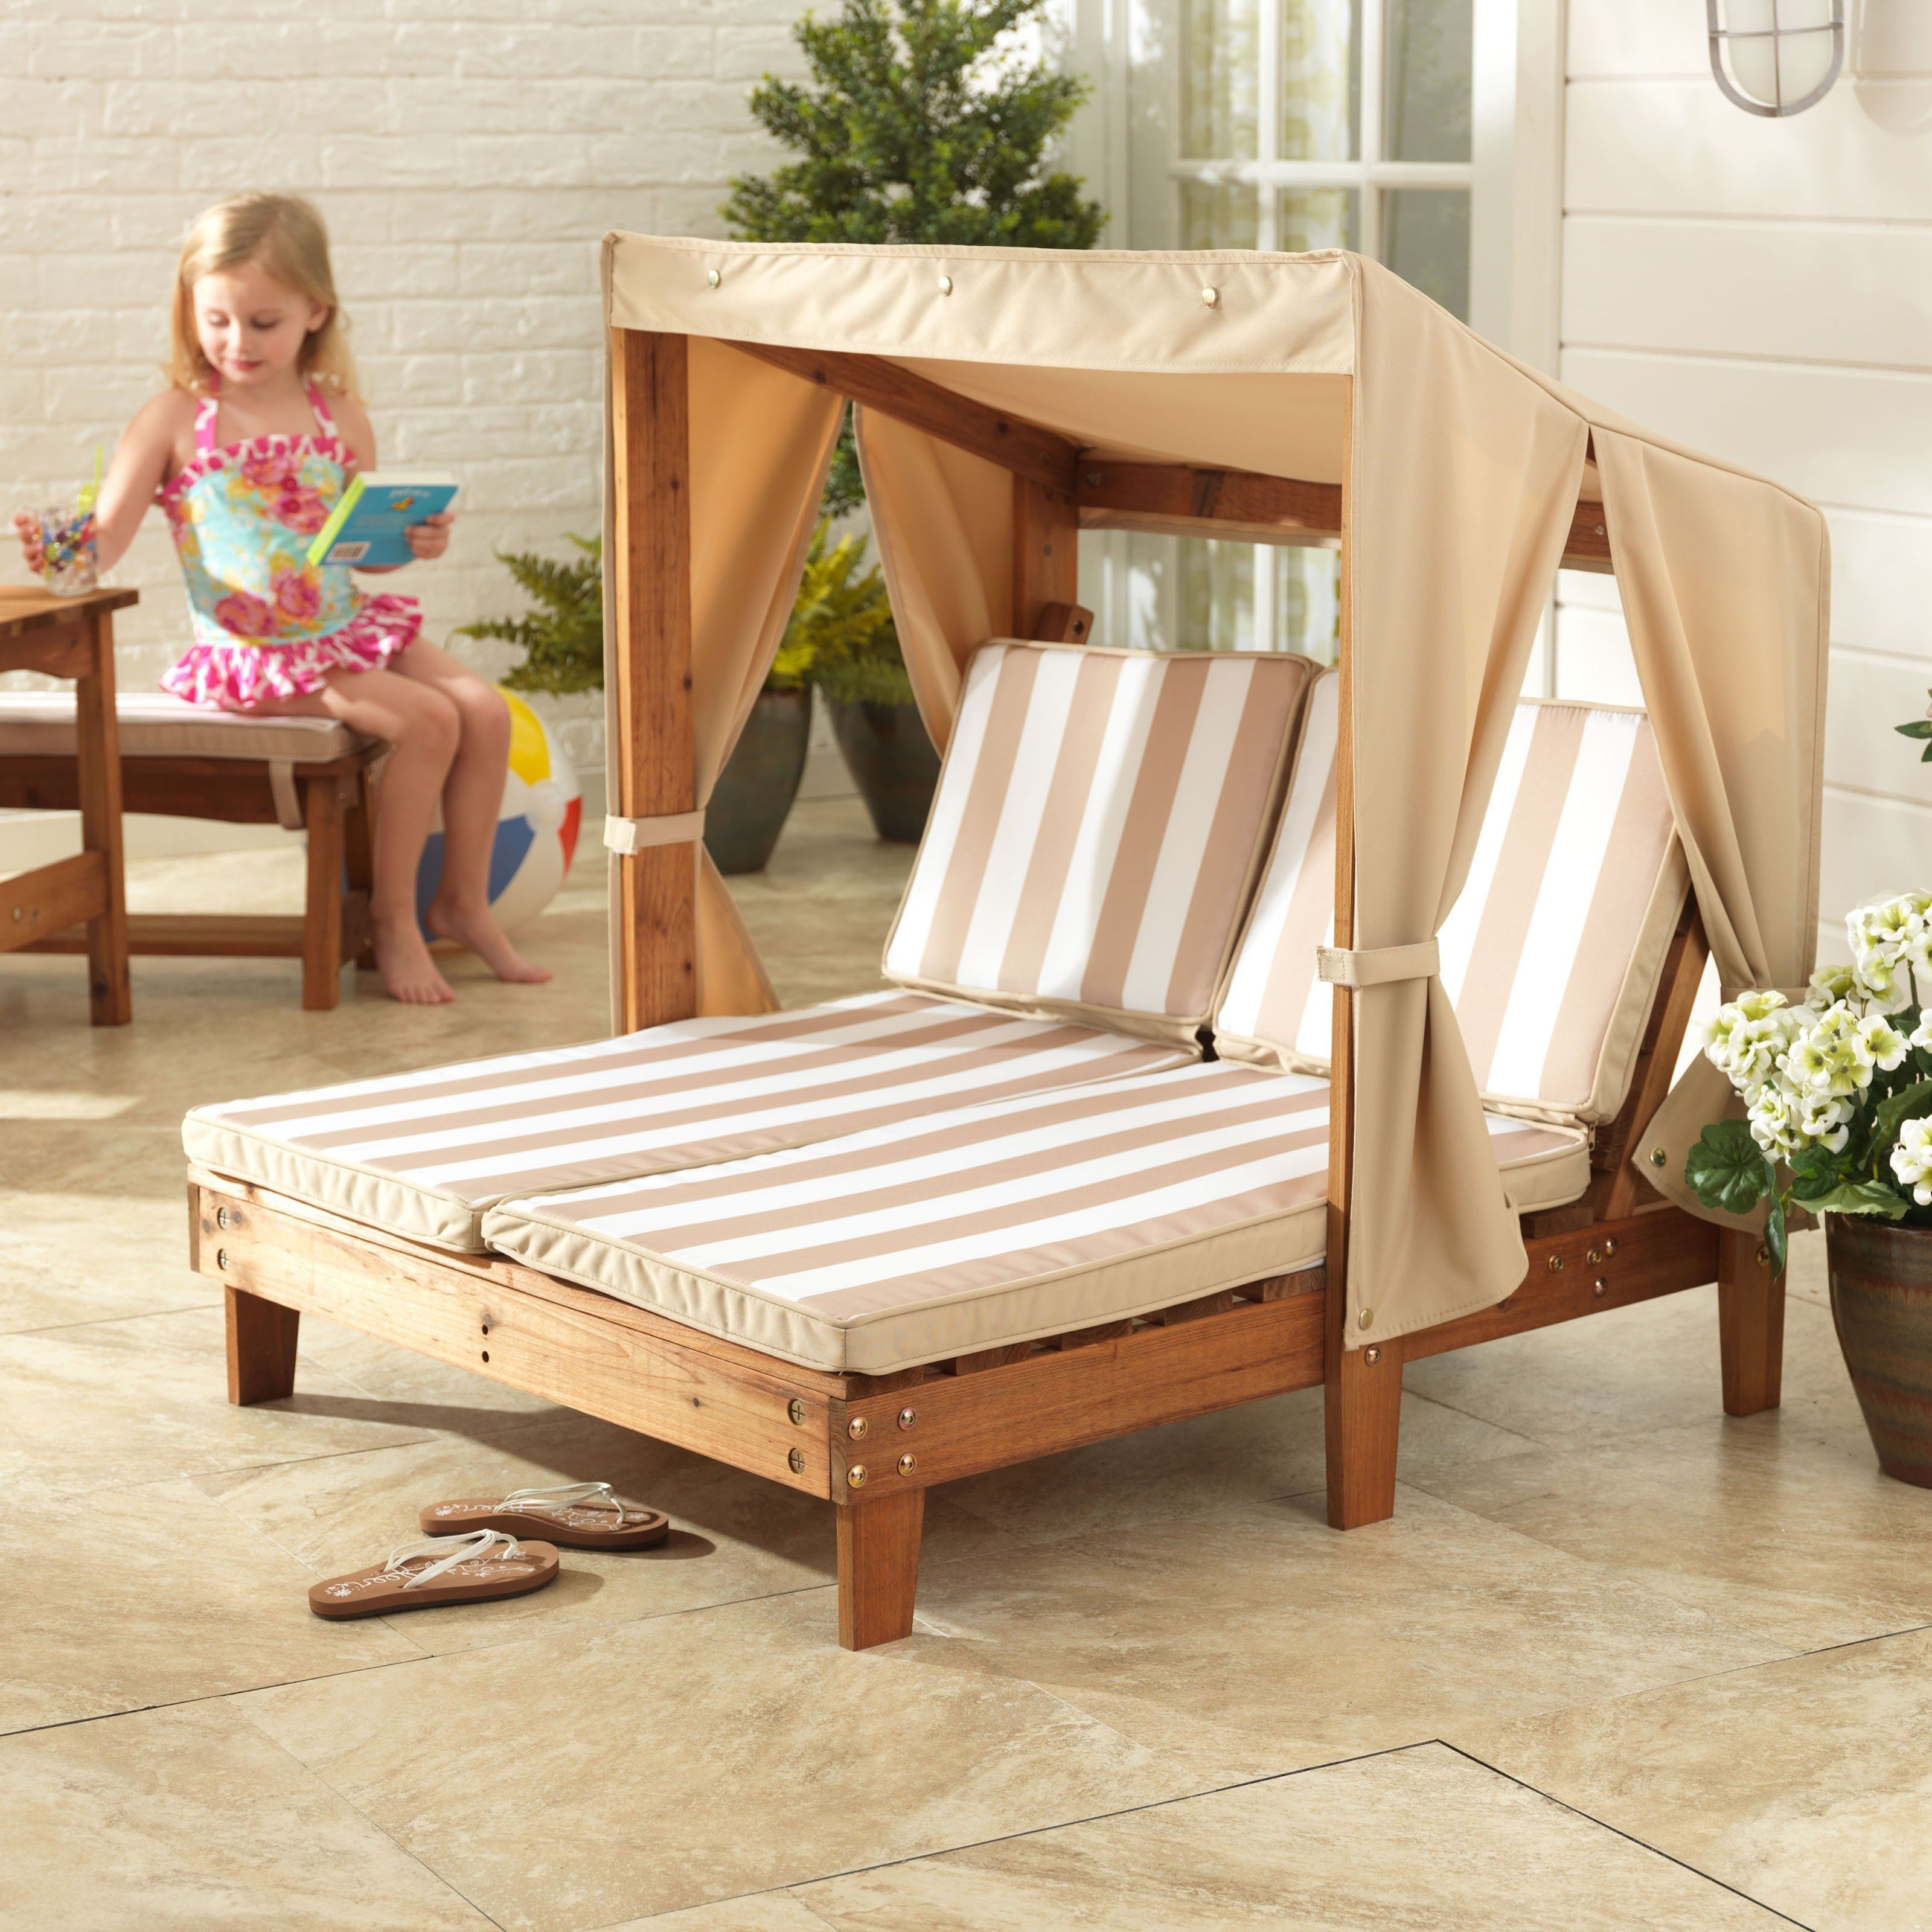 Kidkraft Double Chaise Lounges Inside Fashionable Kidkraft Double Chaise Chair – 502 – Walmart (View 1 of 15)